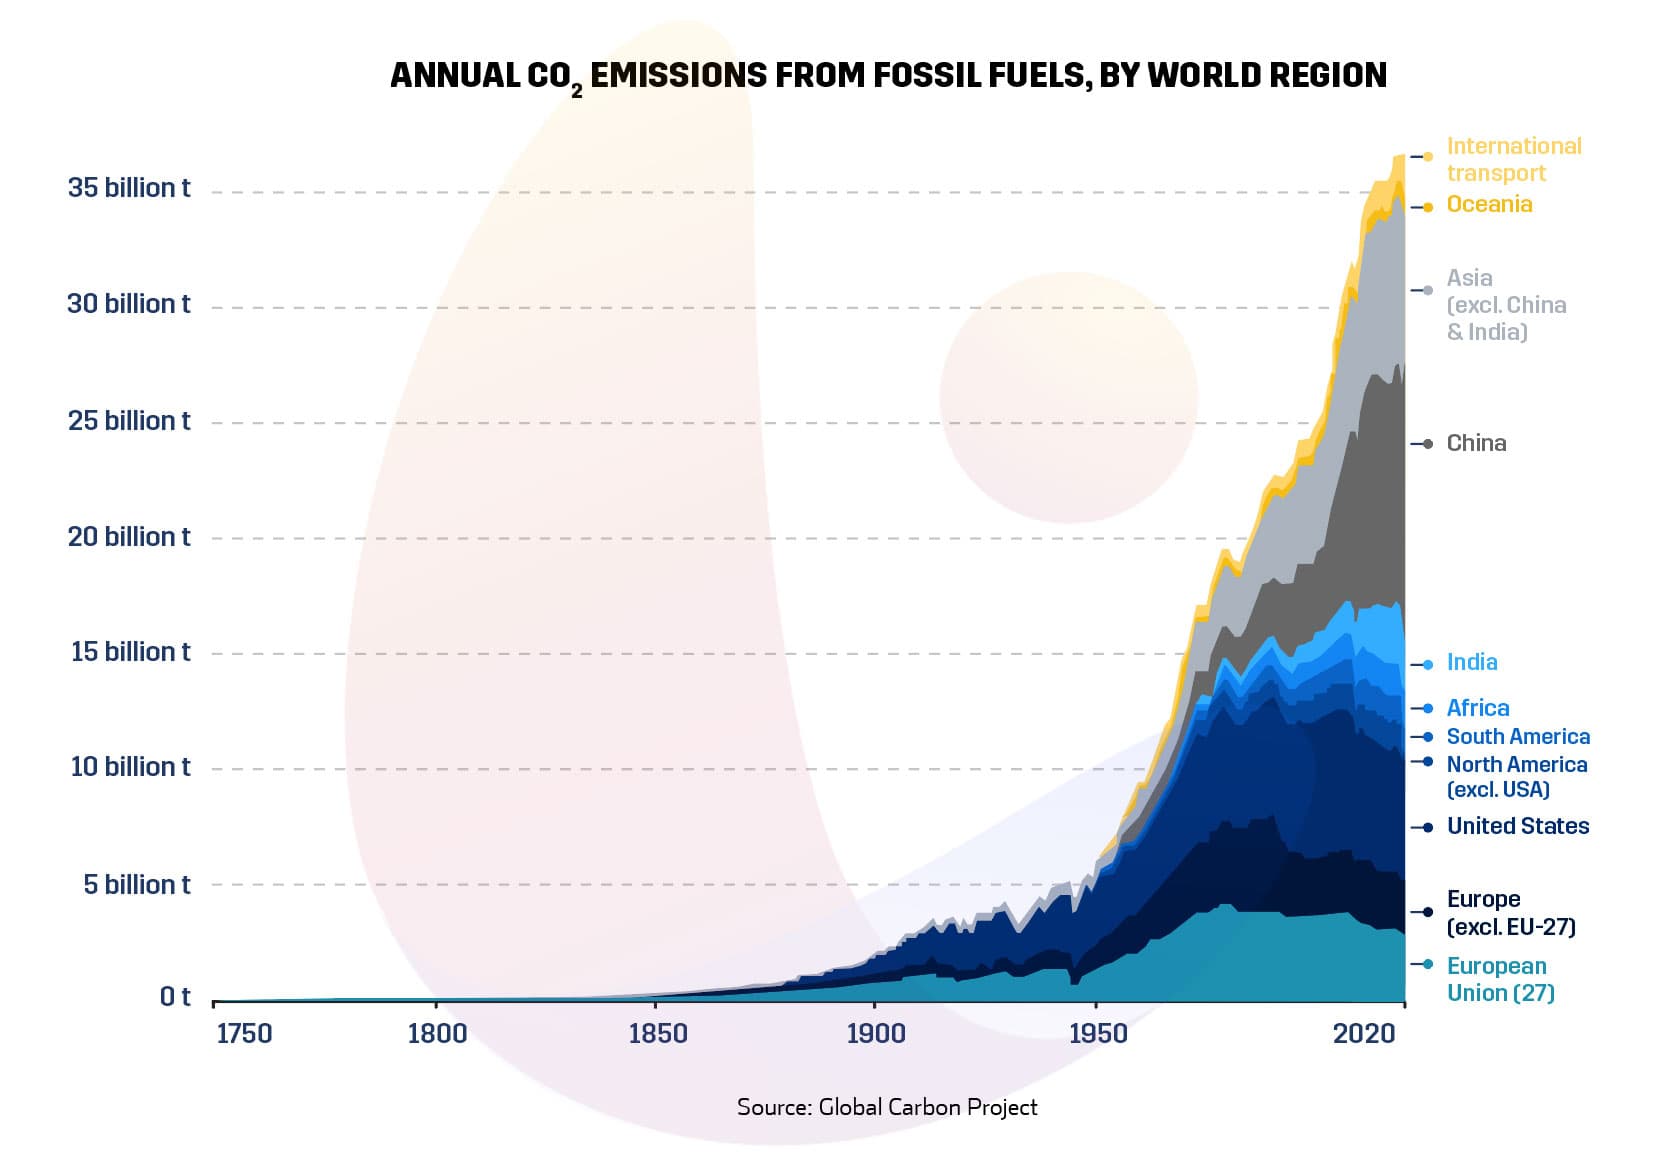 Annual Co2 emissions from fossil fuels, by world region